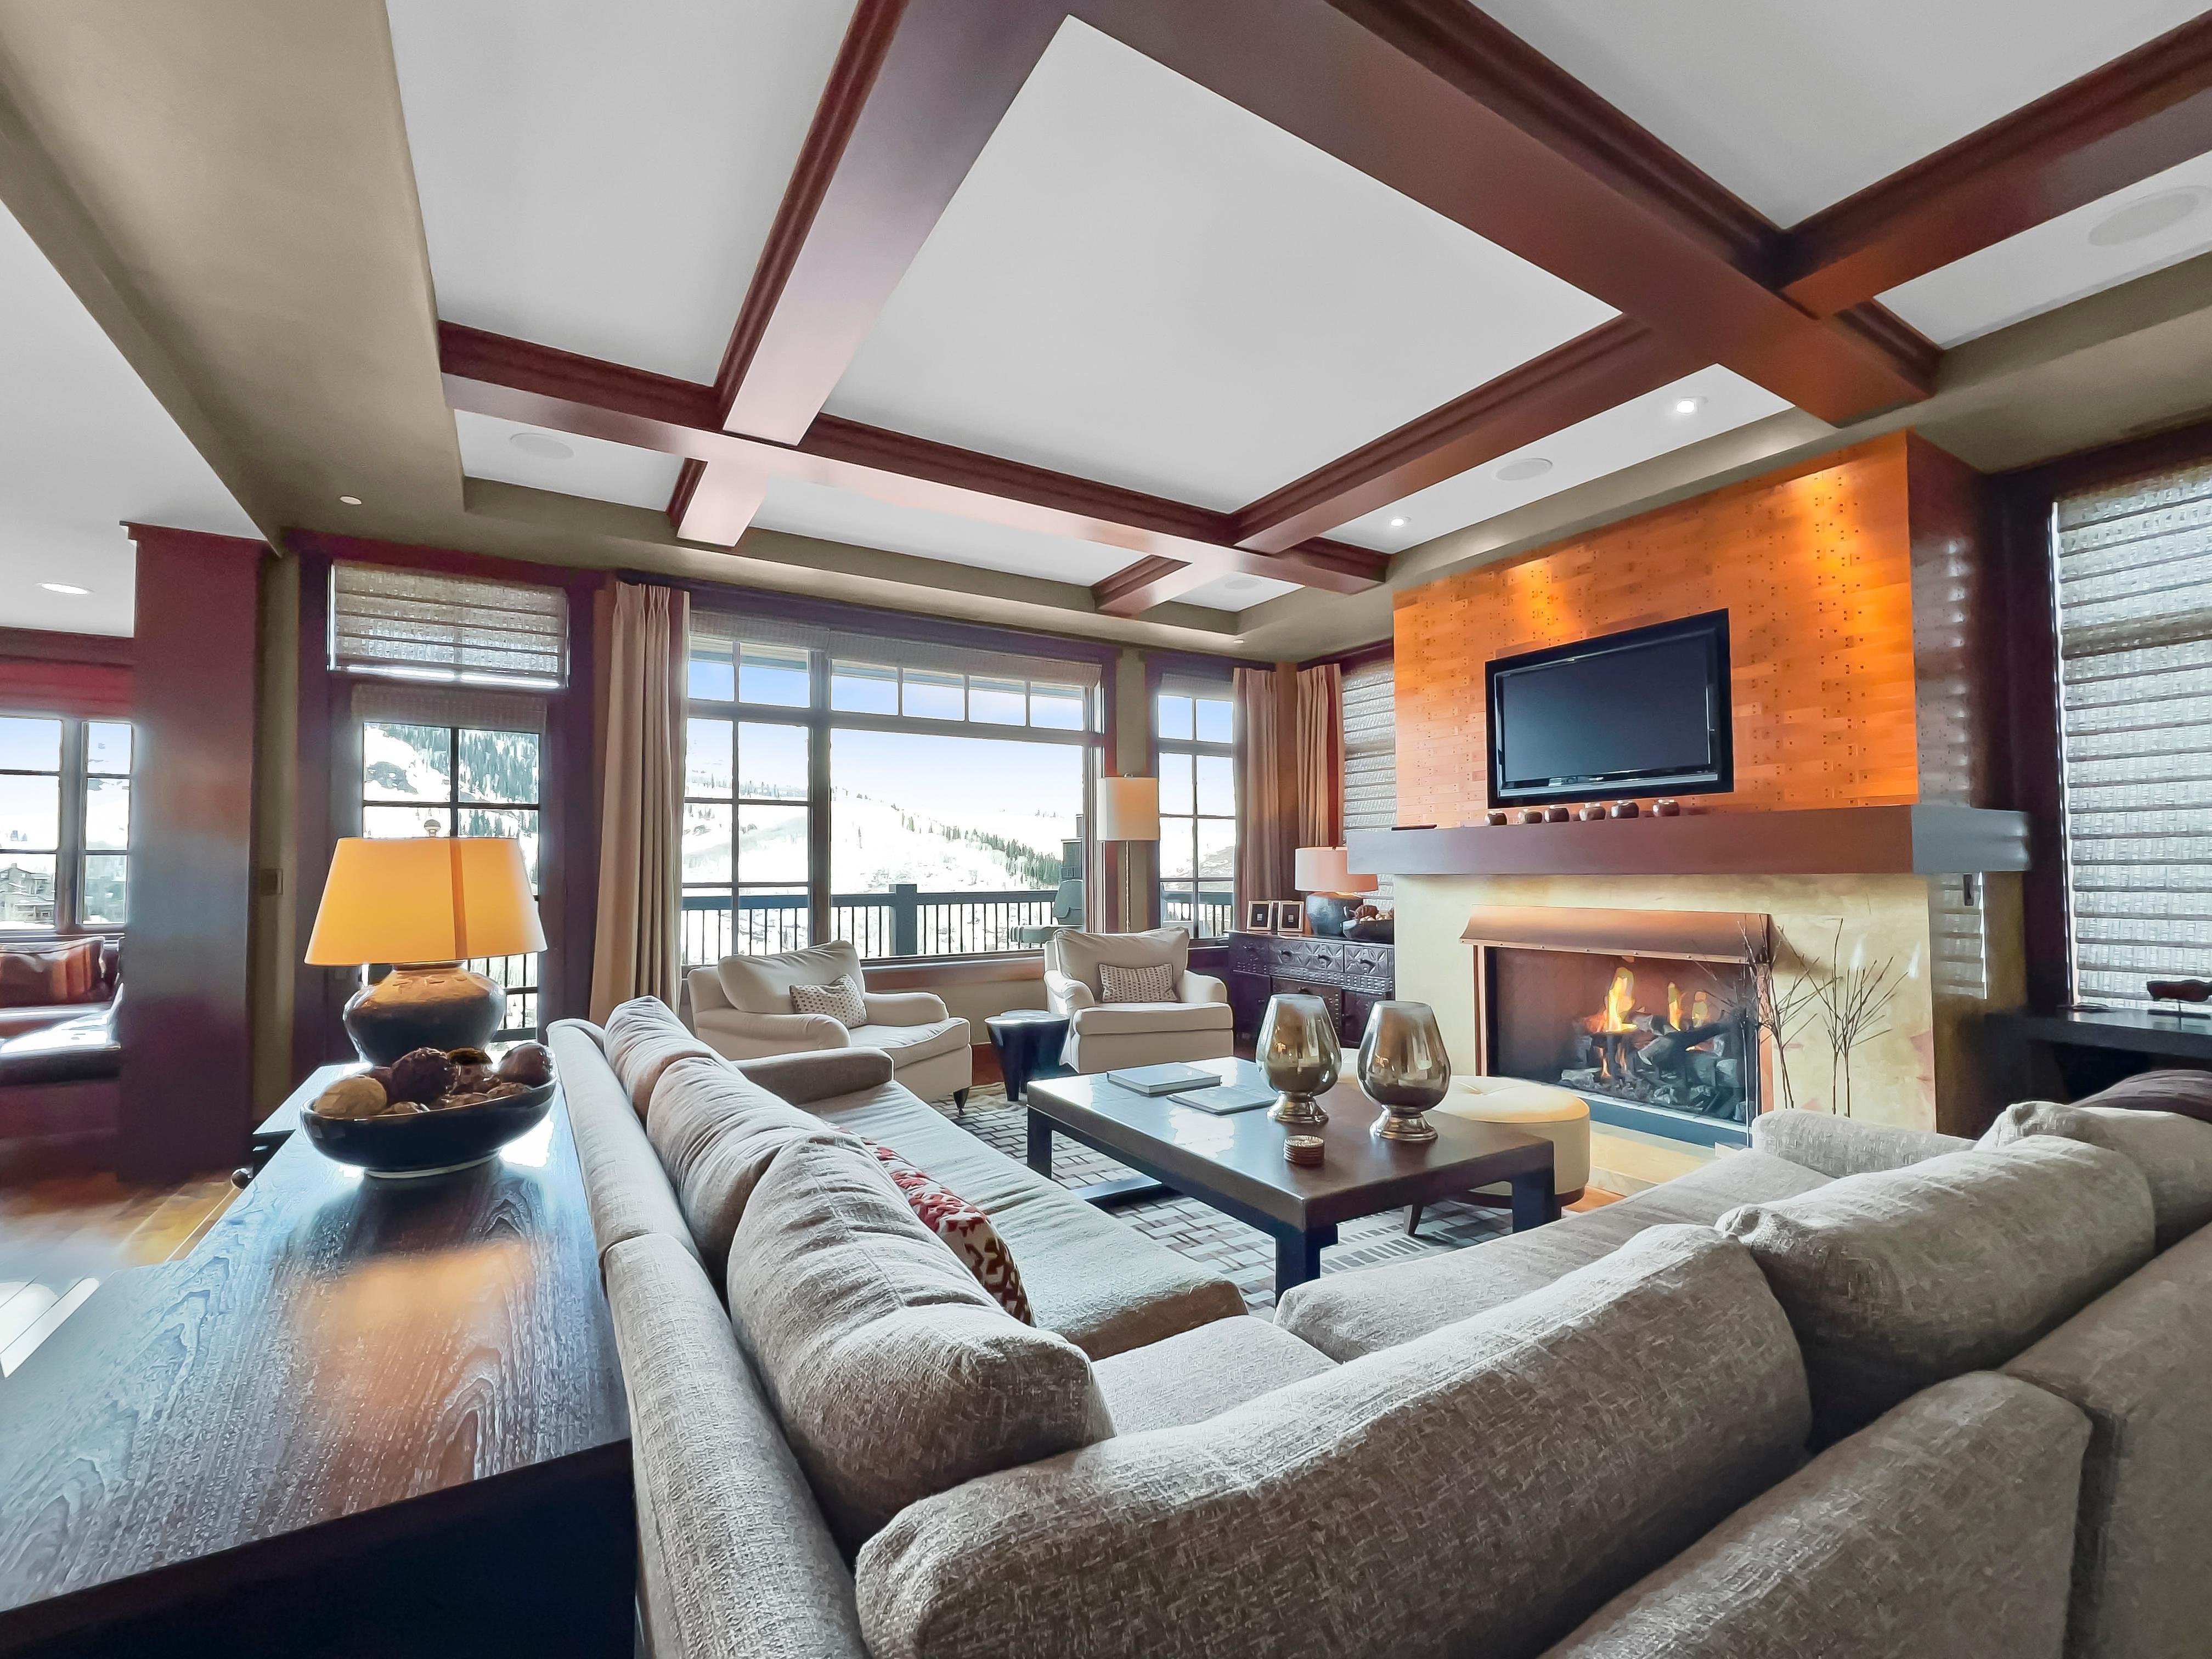 401 Flagstaff Lodge Ski-In/Ski-Out Escape! Luxury at Deer Valley Mountains!